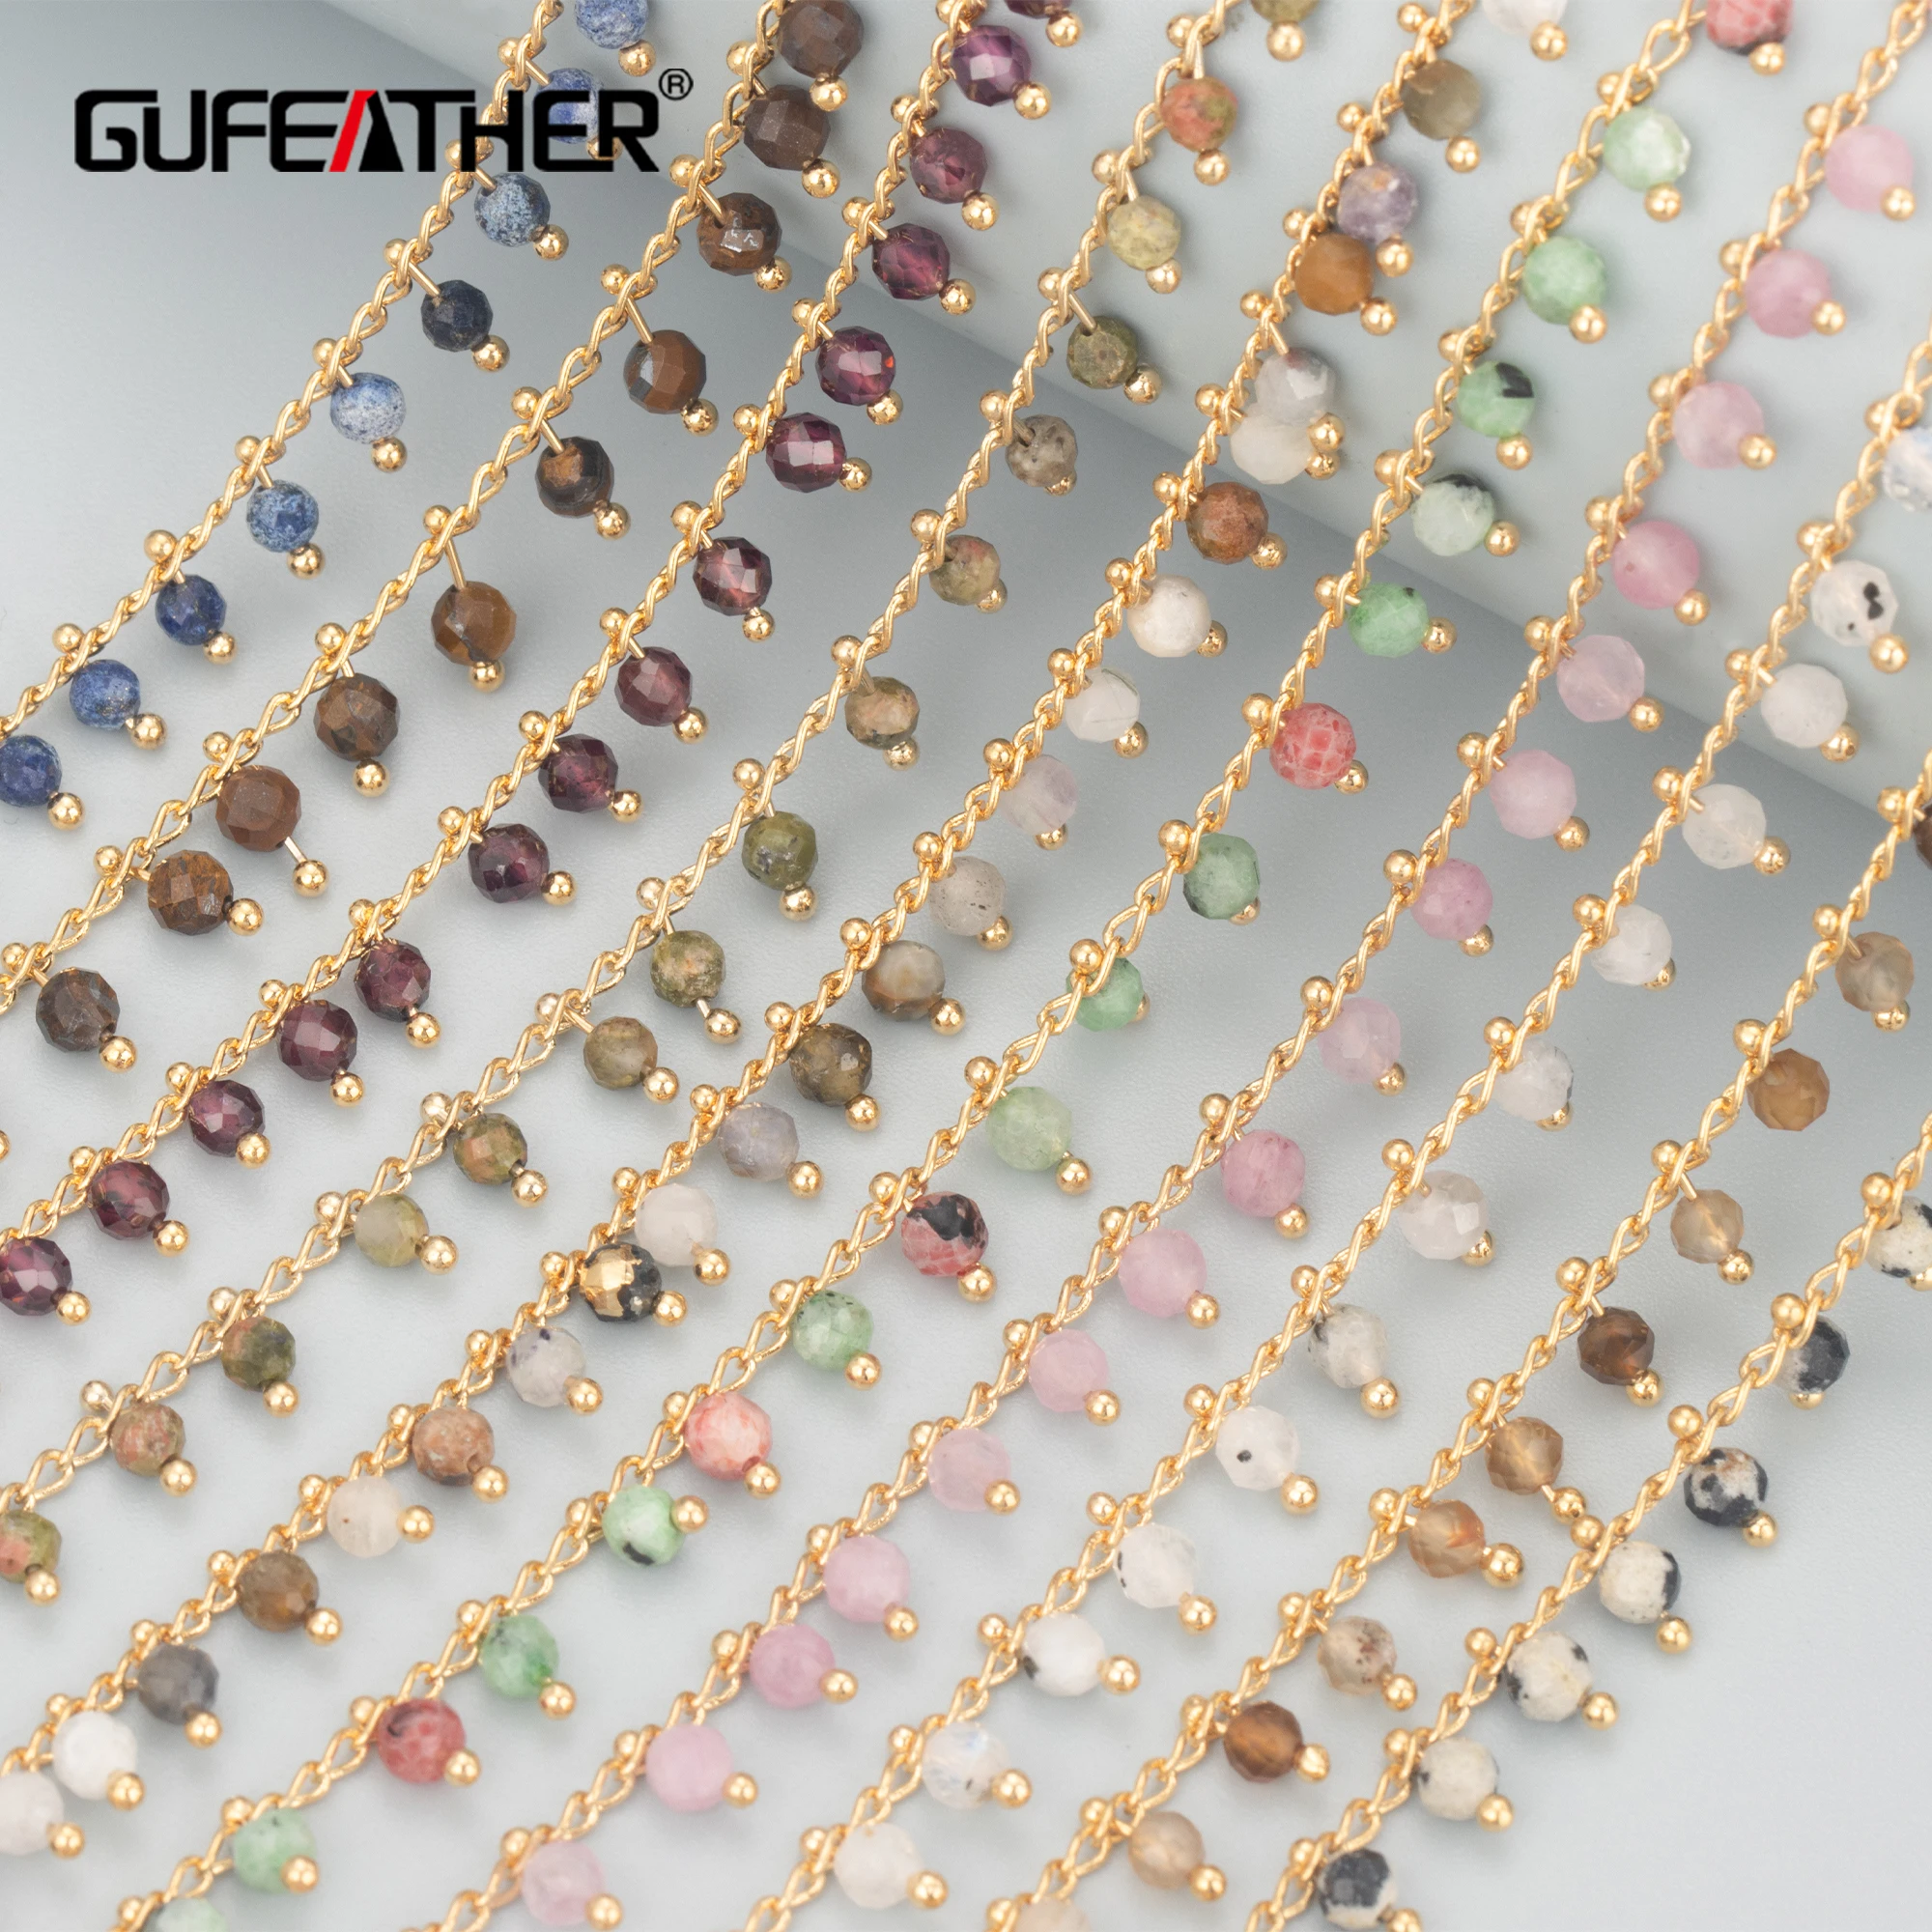 GUFEATHER C82,jewelry accessories,pass REACH,nickel free,18k gold plated,natural stone,jewelry making,diy chain necklace,1m/lot